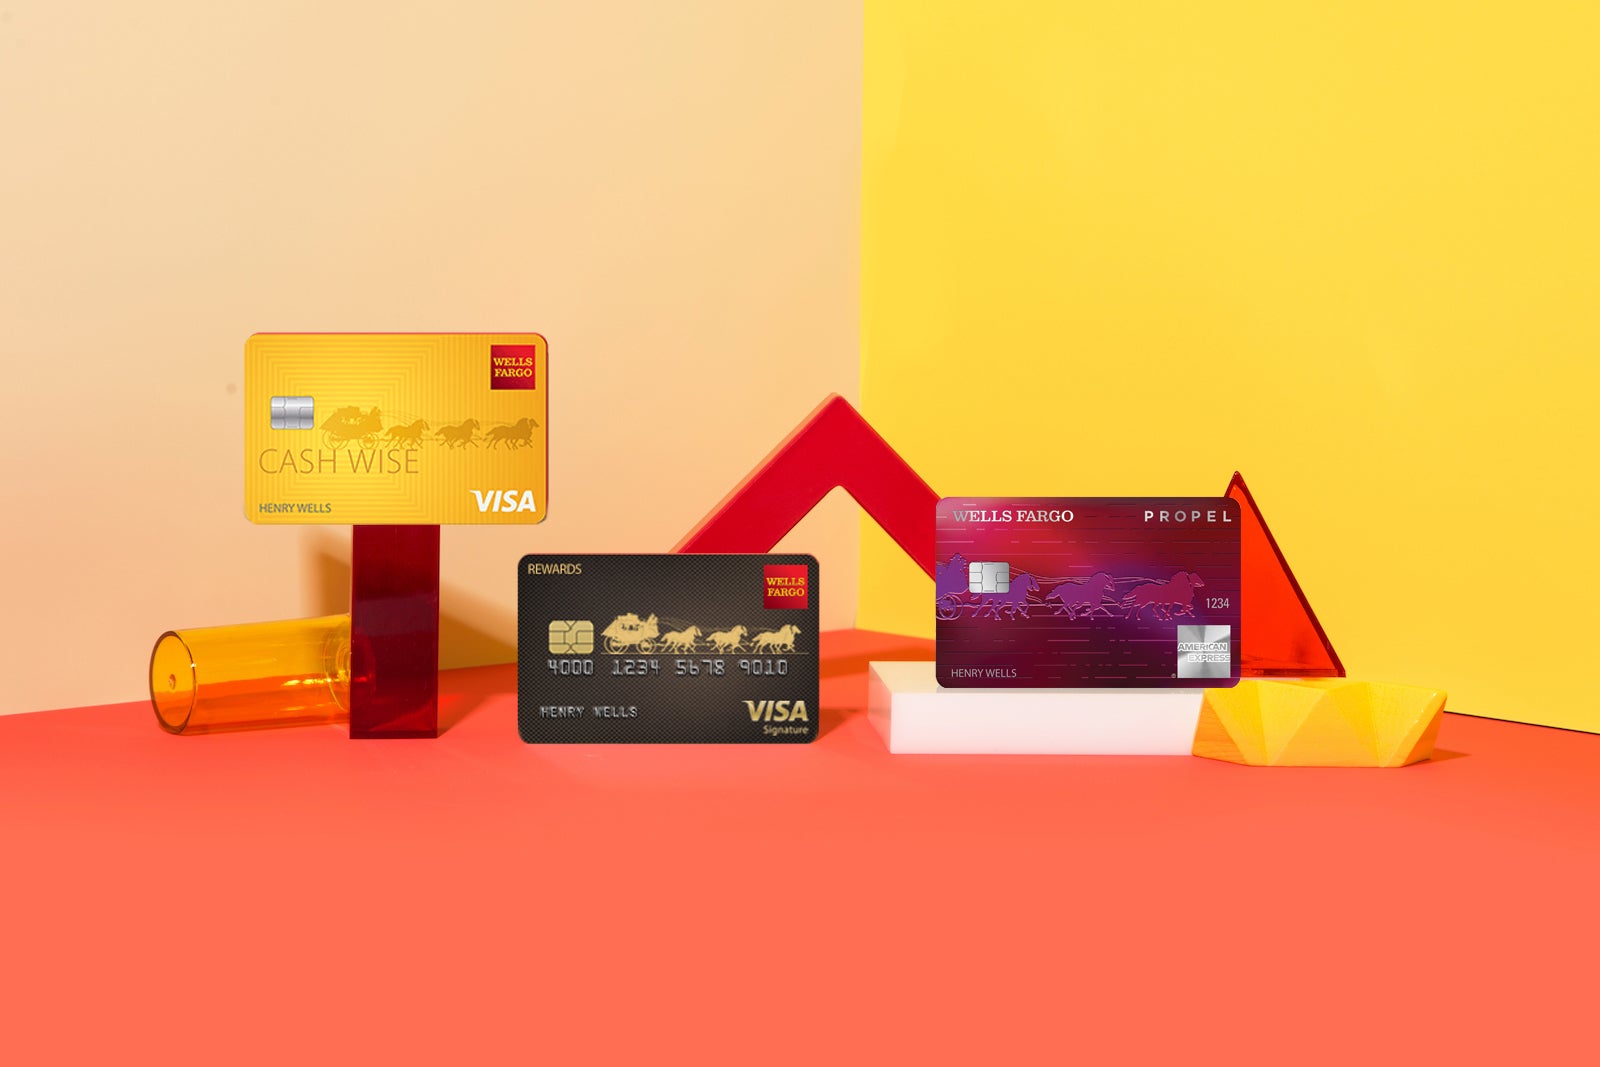 best-wells-fargo-credit-cards-of-2020-the-points-guy-the-points-guy